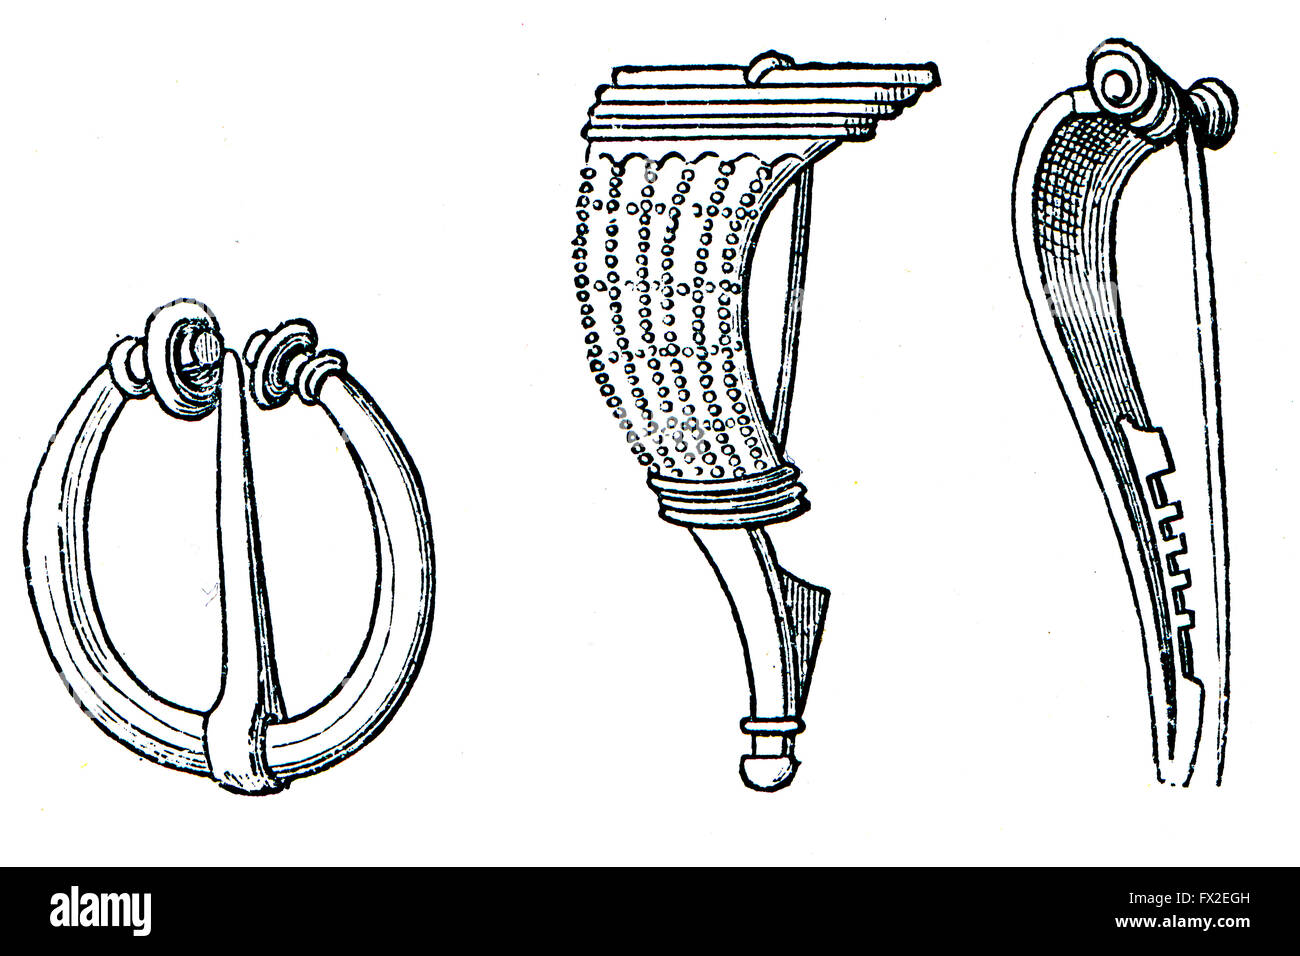 An antique Roman brooches - vintage engraved illustration - of the encyclopedia publishers Education, St. Petersburg, Russian Empire, 1896 Stock Photo